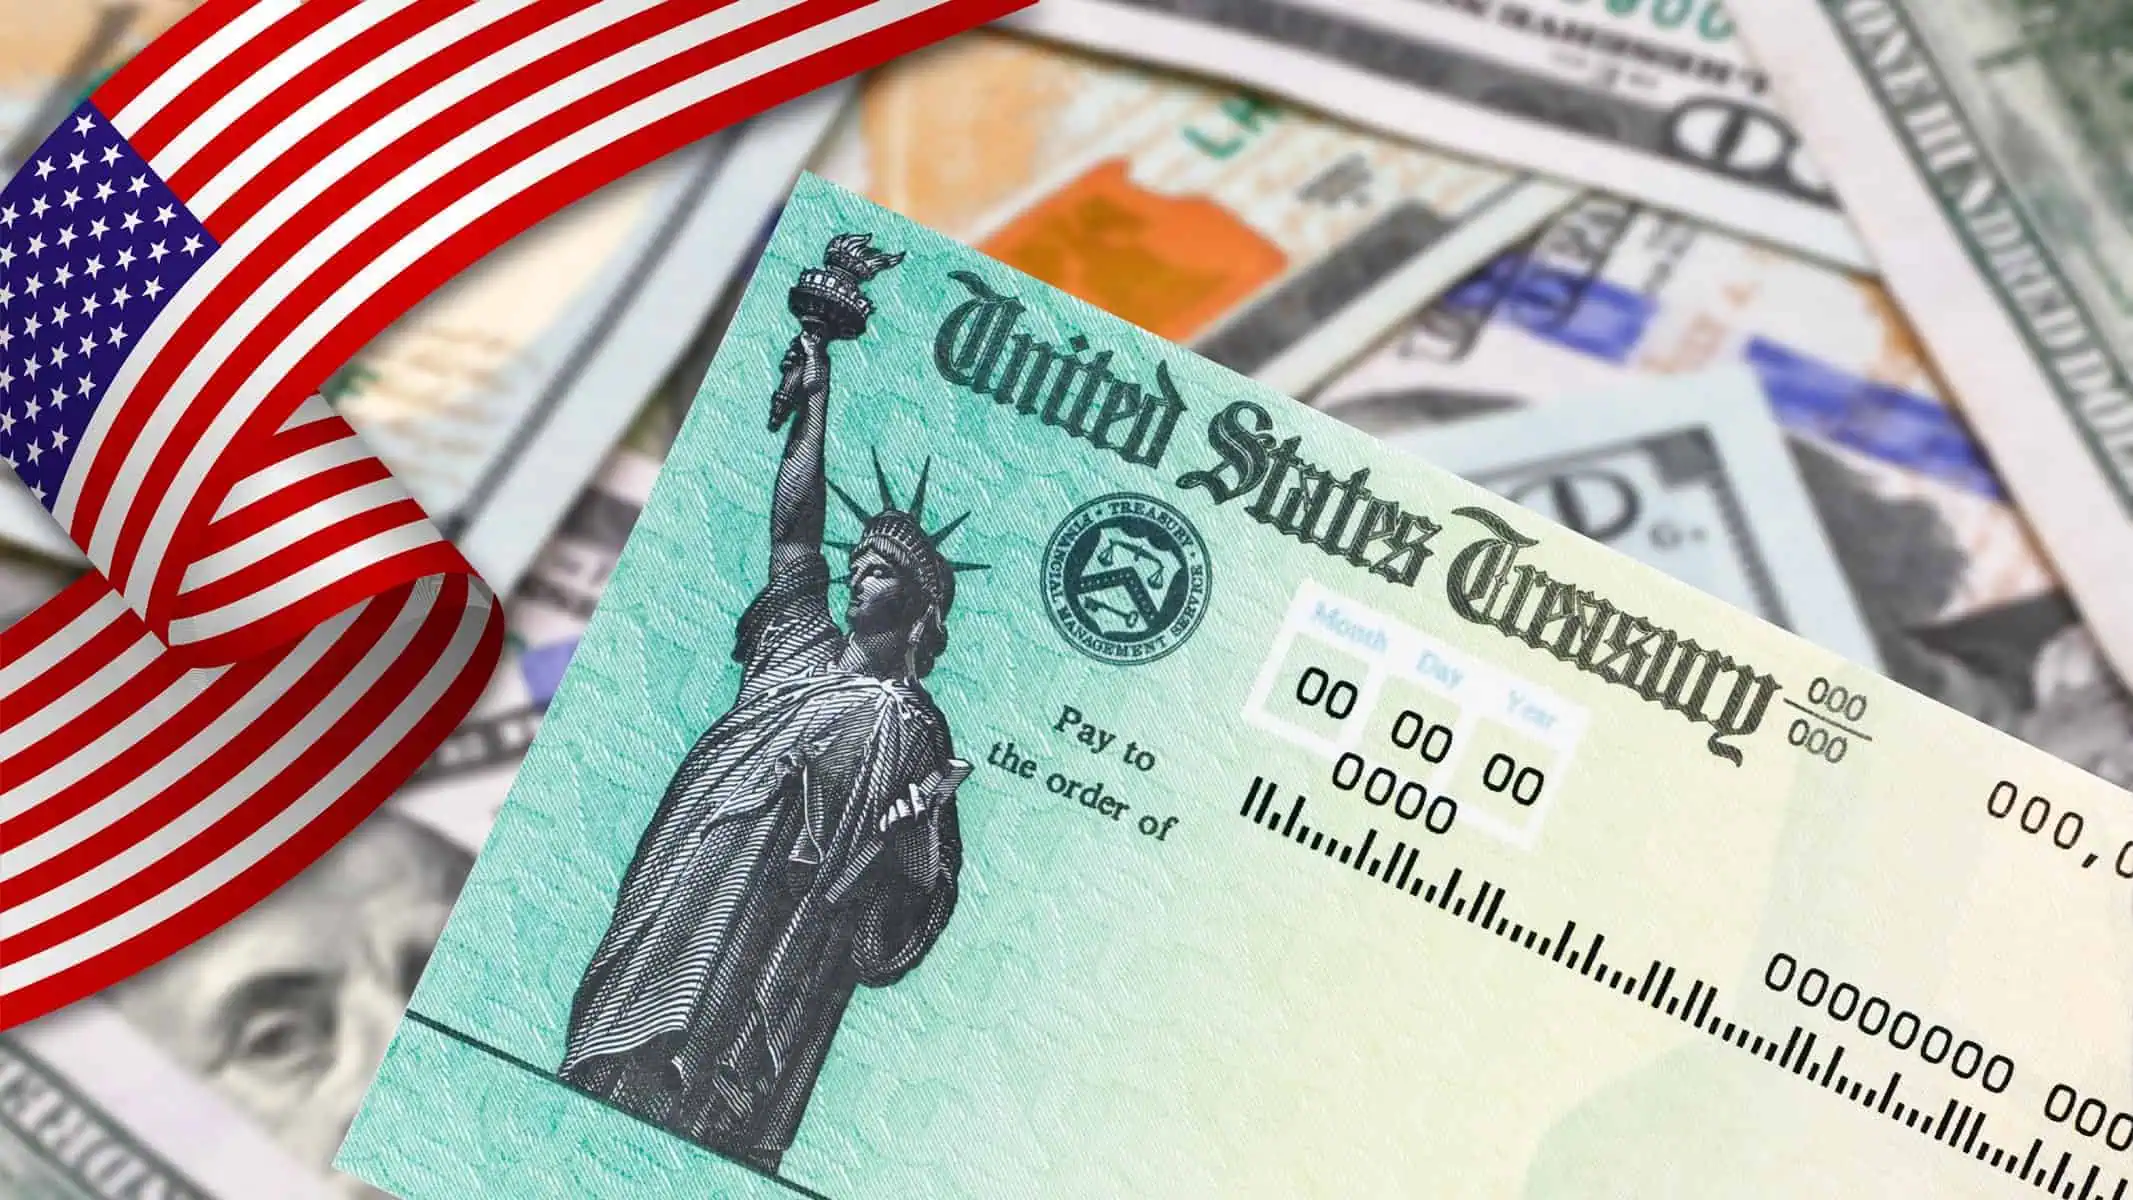 State Refund of Up to $9000 in the United States Who Qualifies